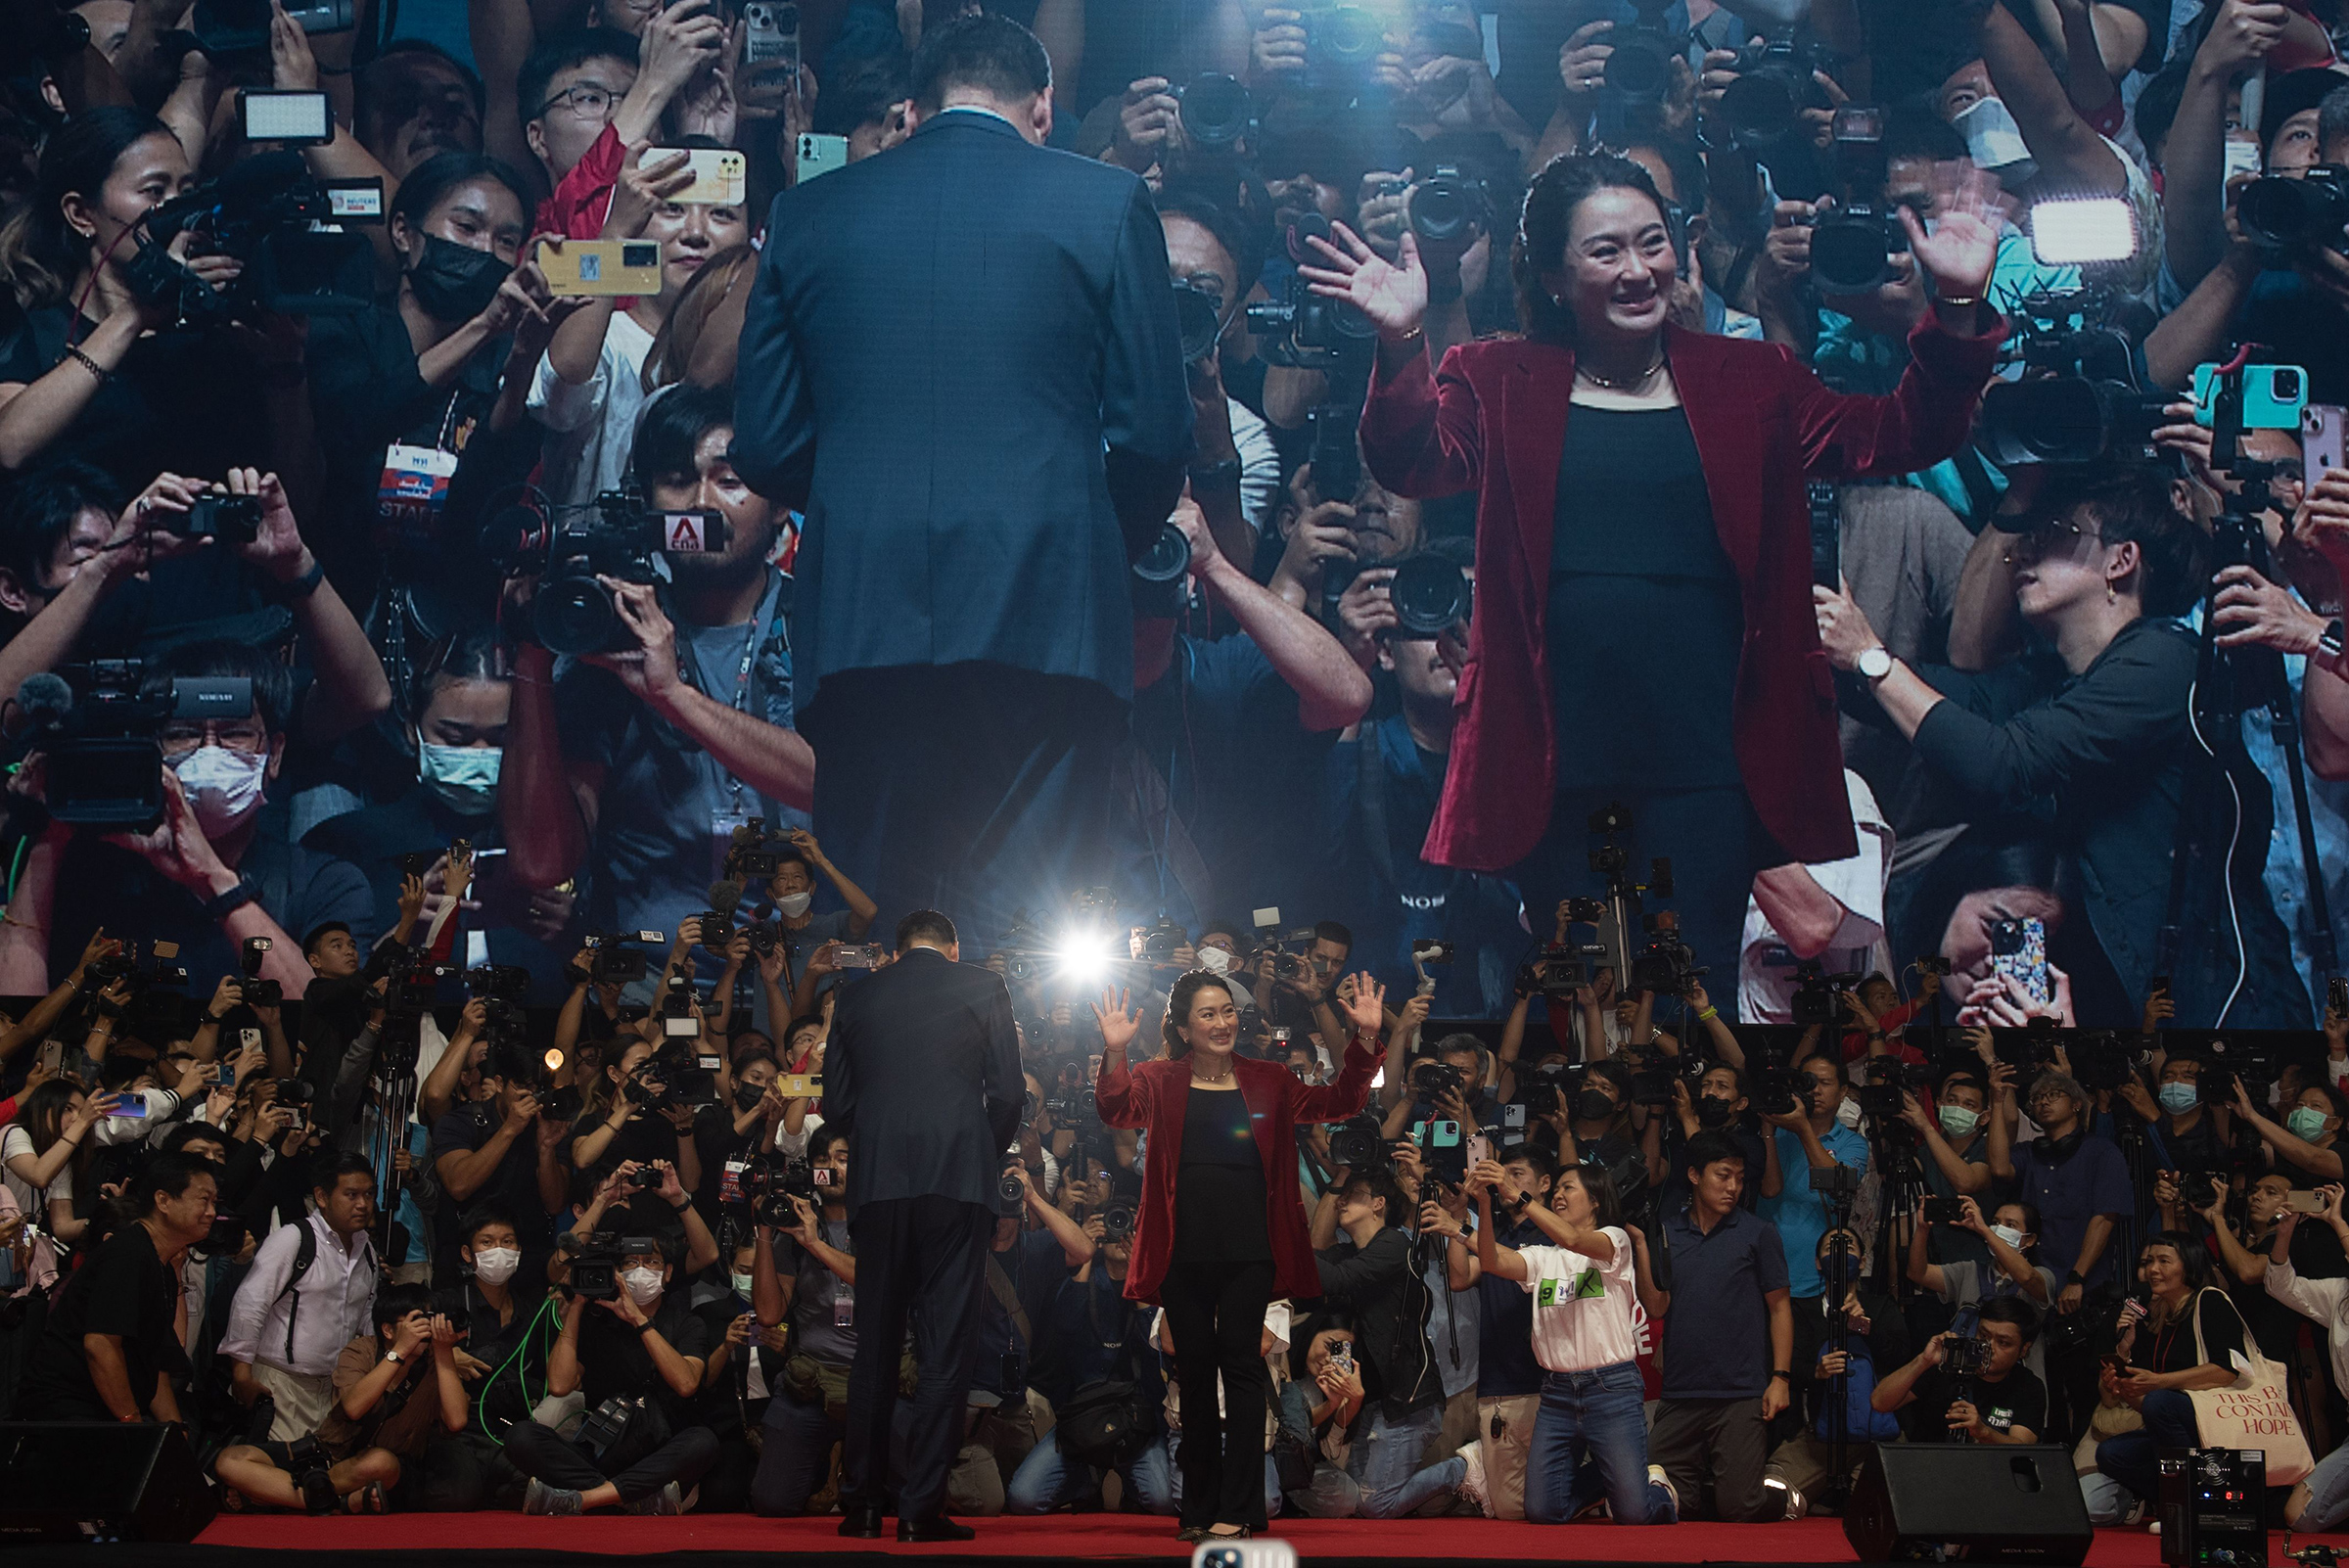 Pheu Thai party candidates Srettha Thavisin, left, and Paethongtarn Shinawatra, right, at the final campaign event ahead of the upcoming general election, on May 12, 2023.